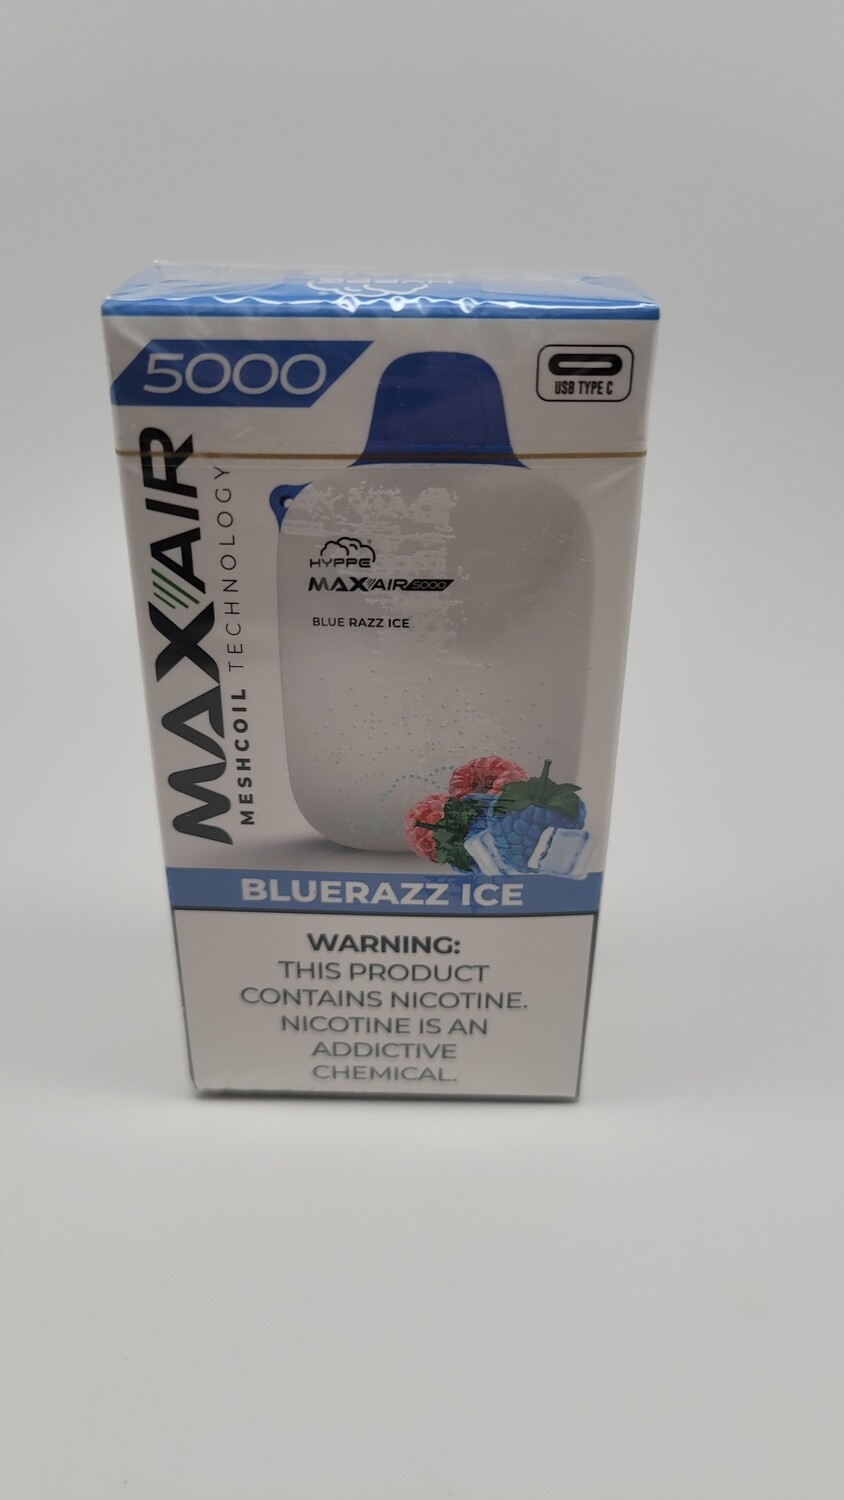 Hyppe Max Air 5000 Bluerazz Ice